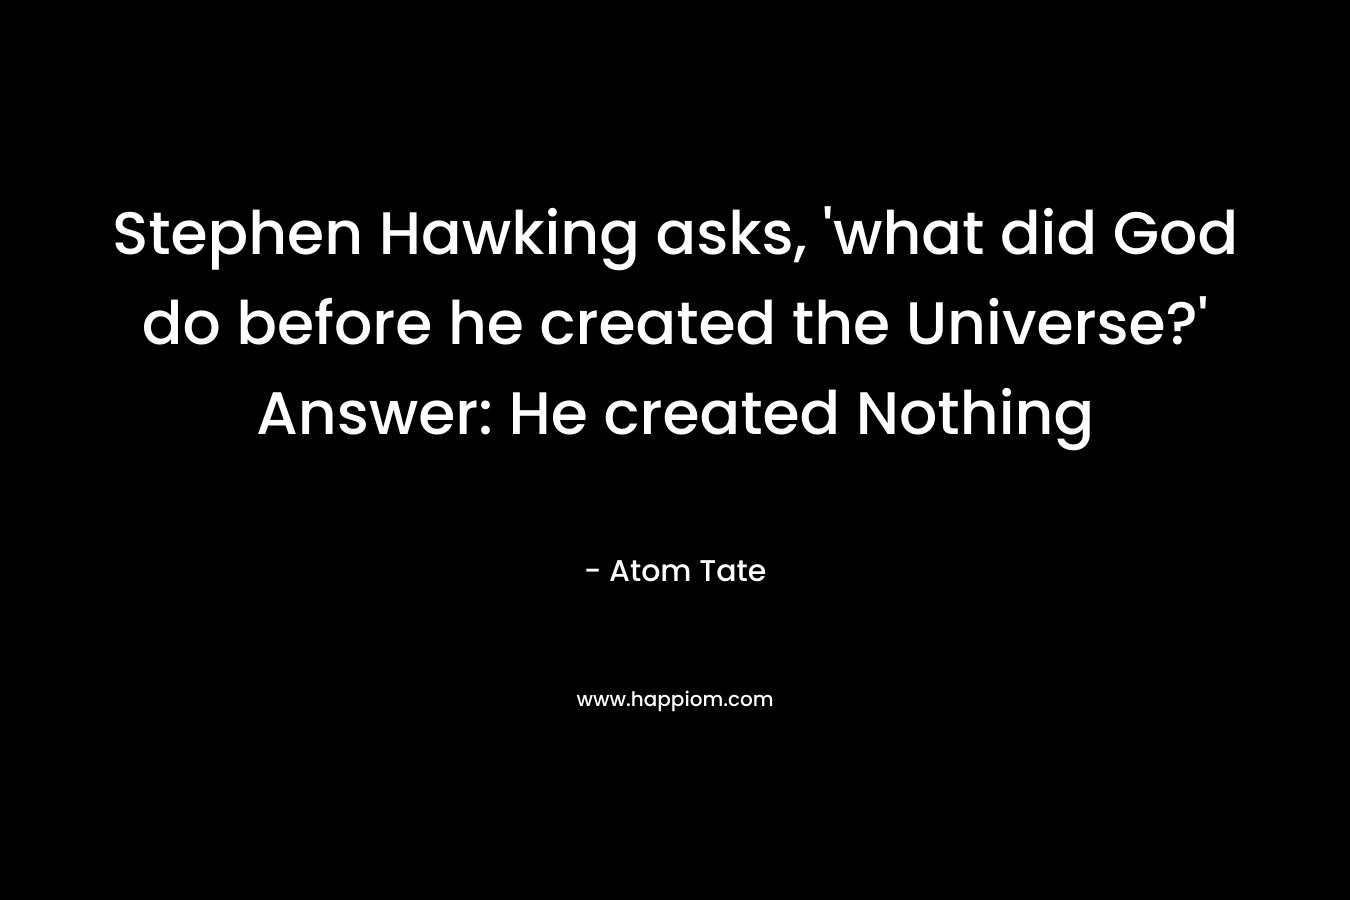 Stephen Hawking asks, 'what did God do before he created the Universe?' Answer: He created Nothing